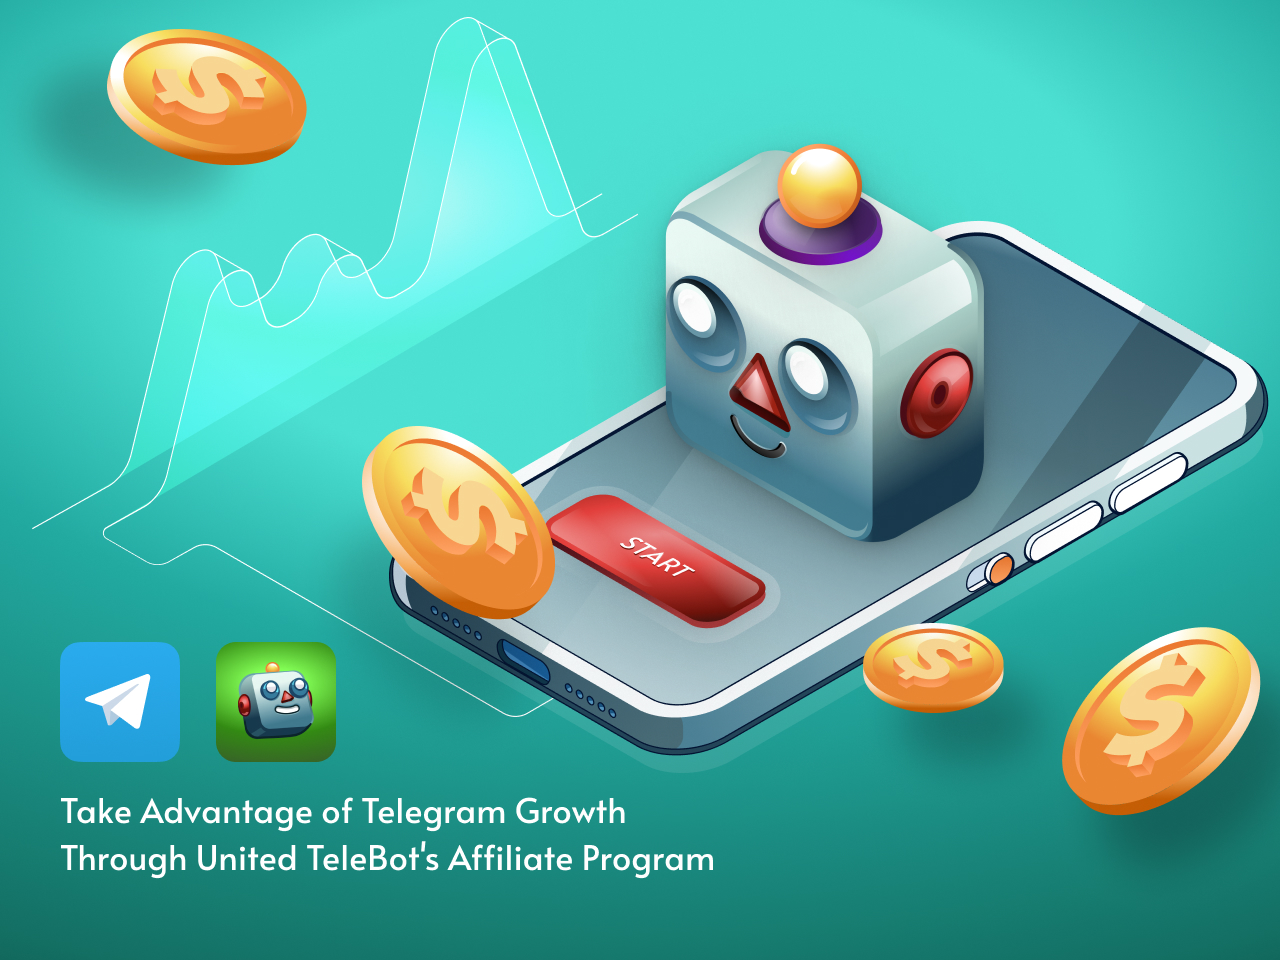 United TeleBot is a New Form of Technique to Earn in Crypto